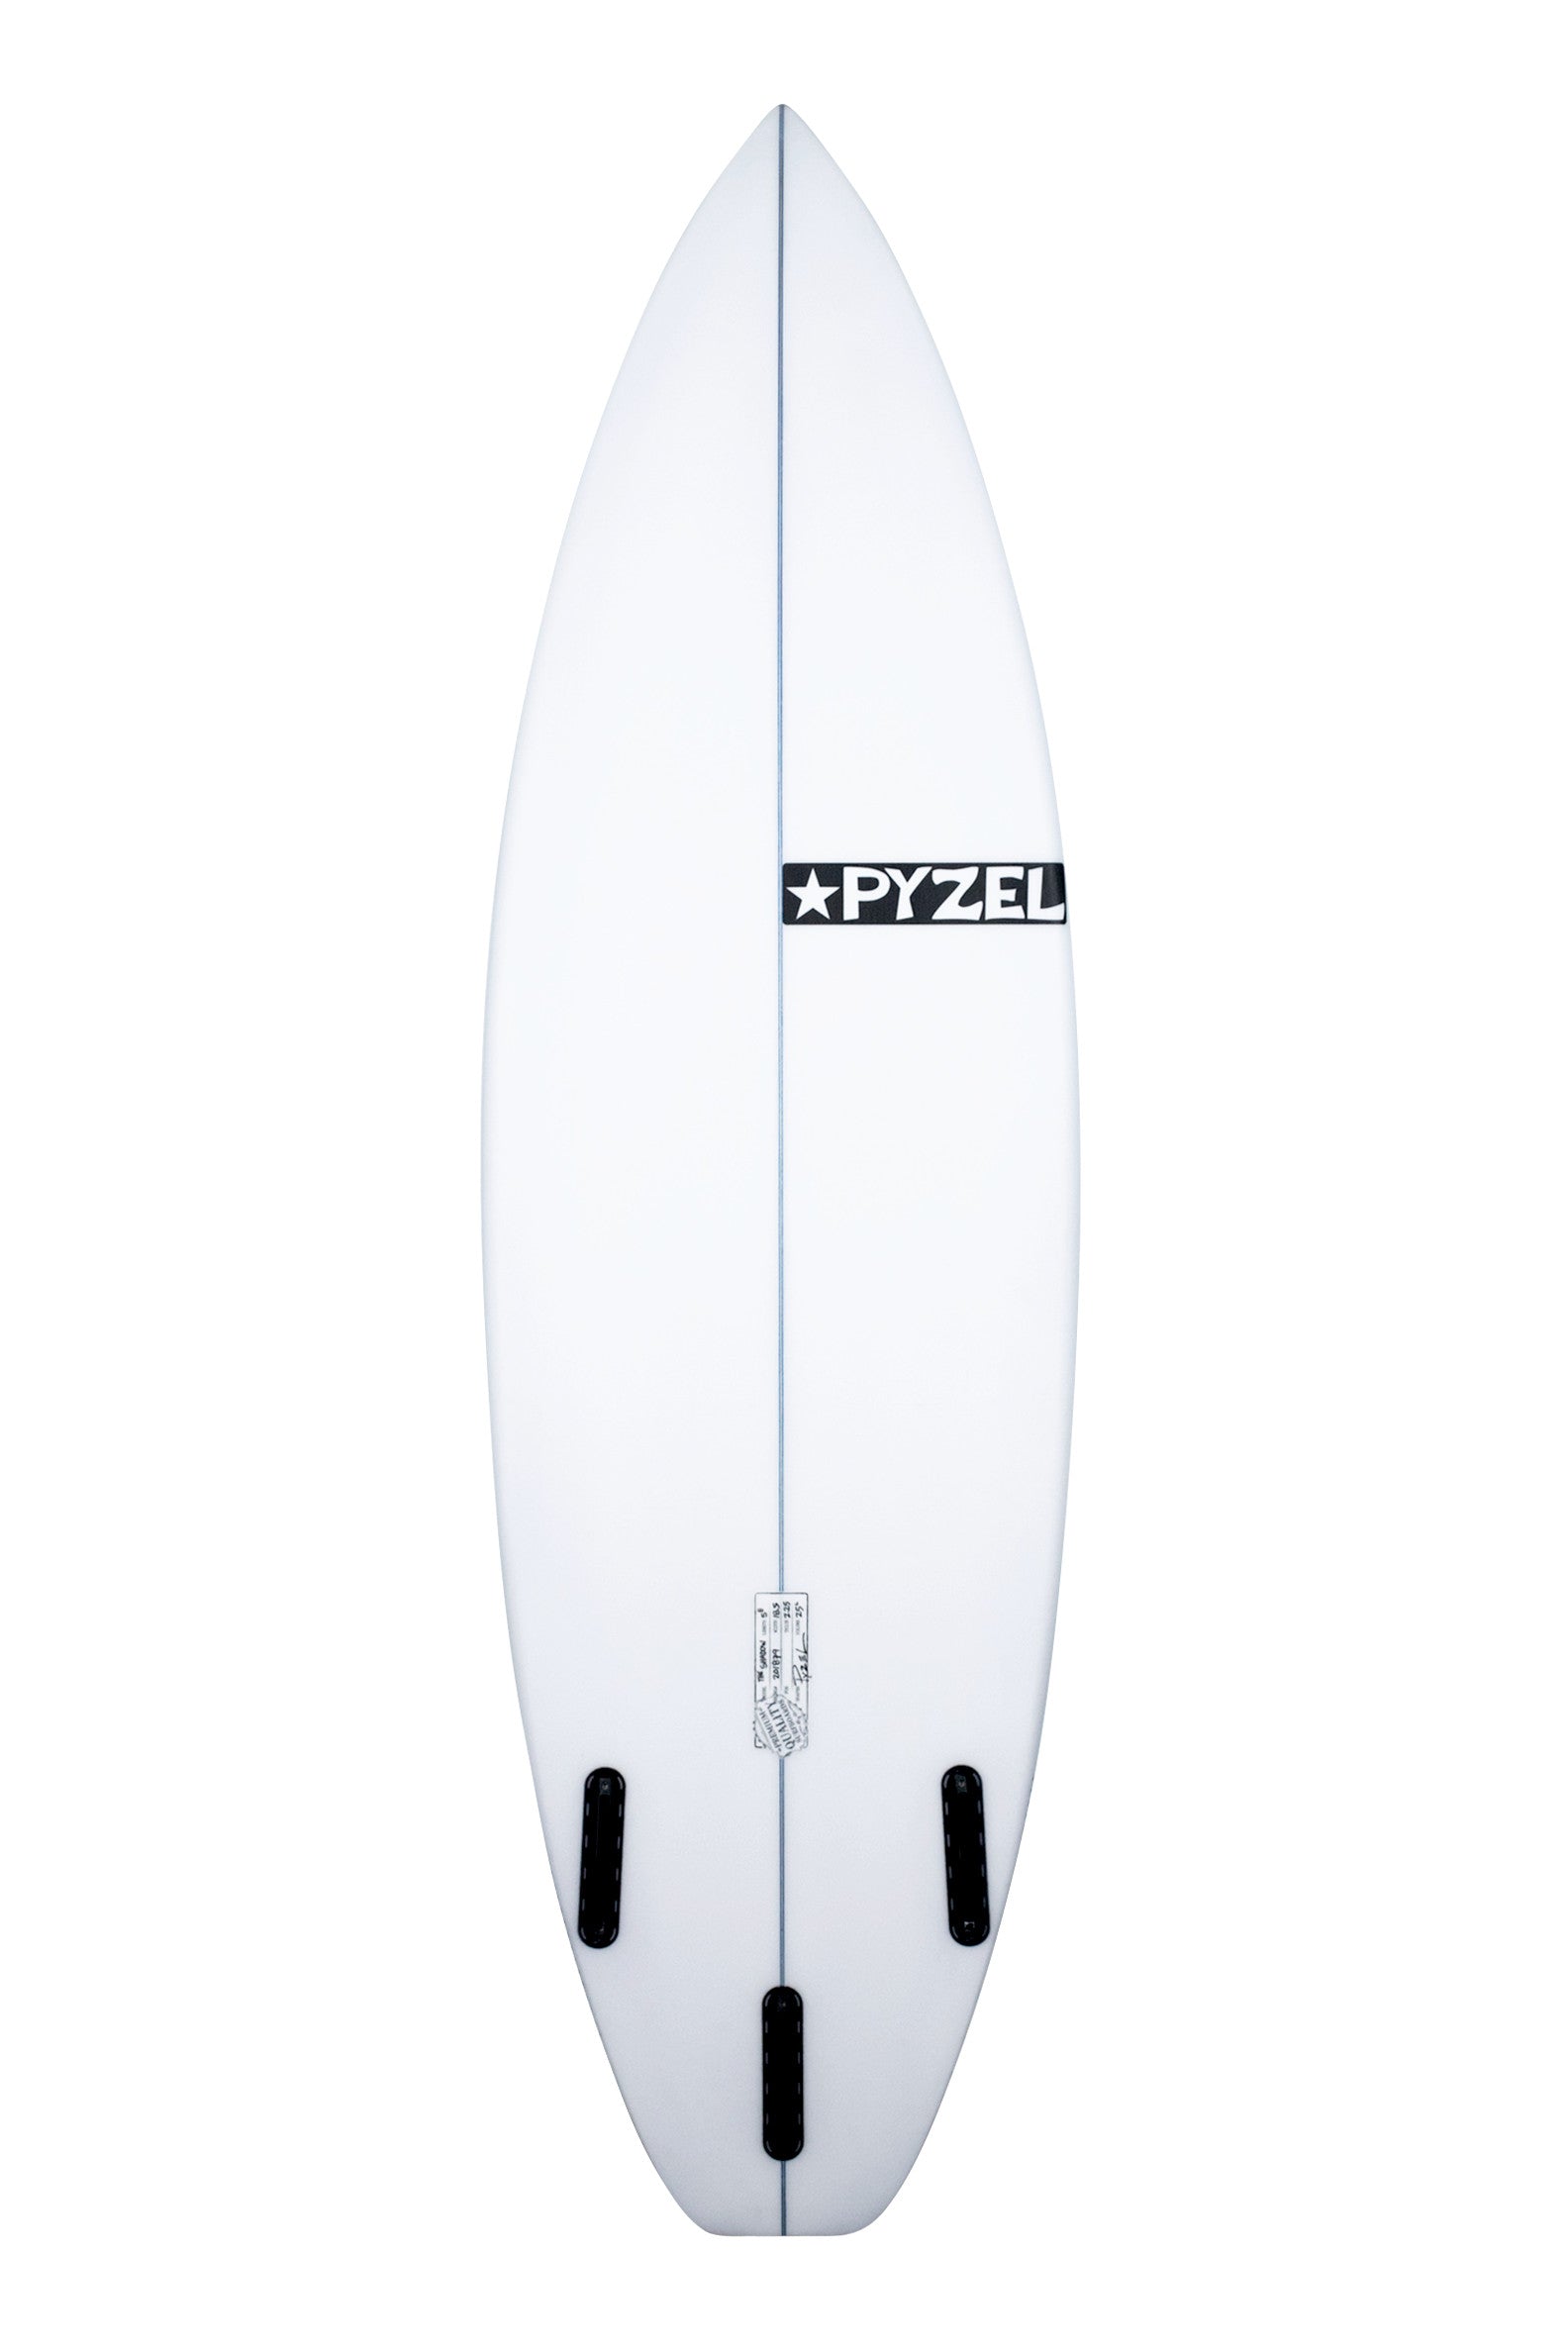 Pyzel Surfboards The Shadow